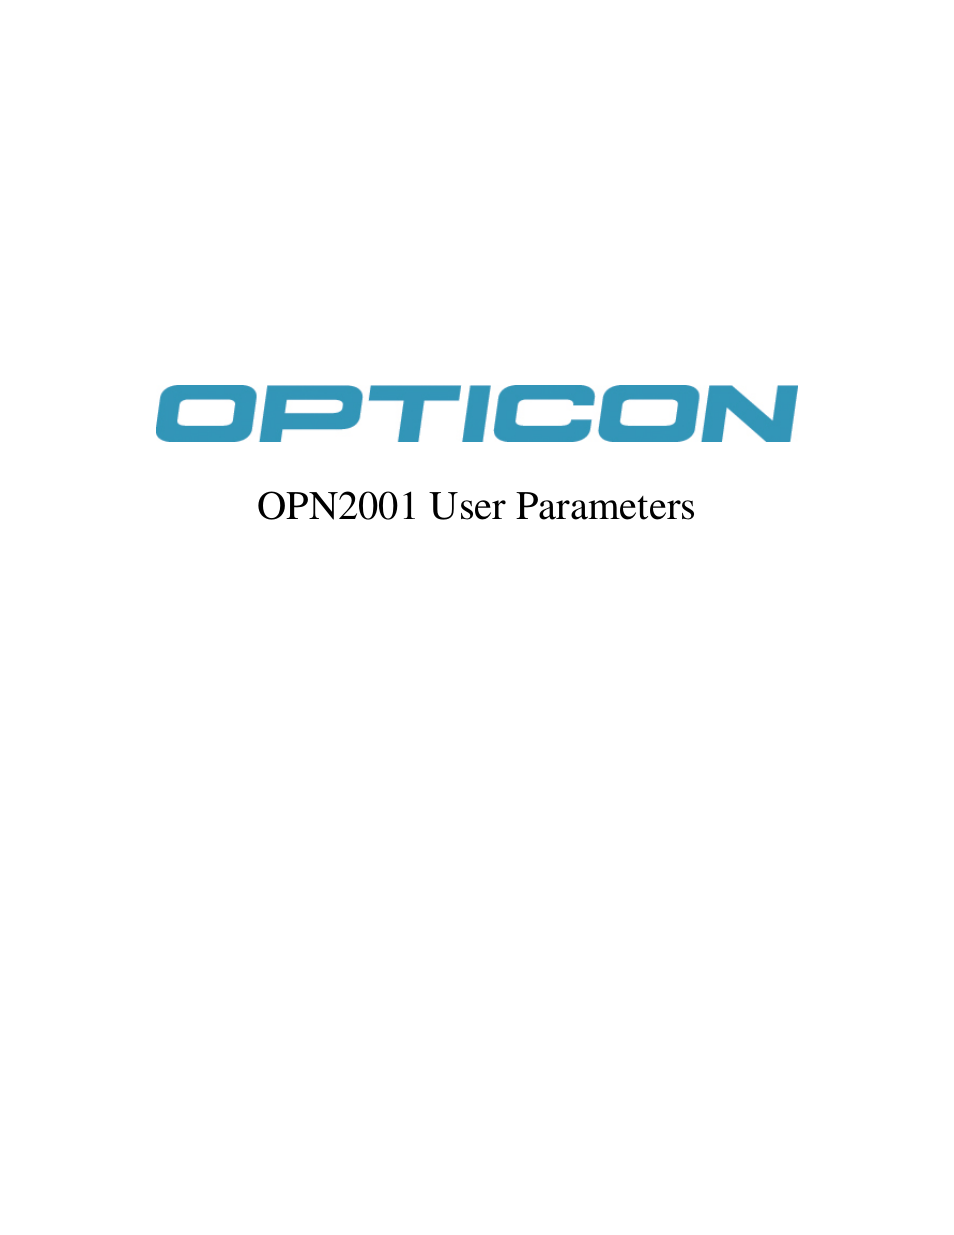 OPN 2001 Device Parameters